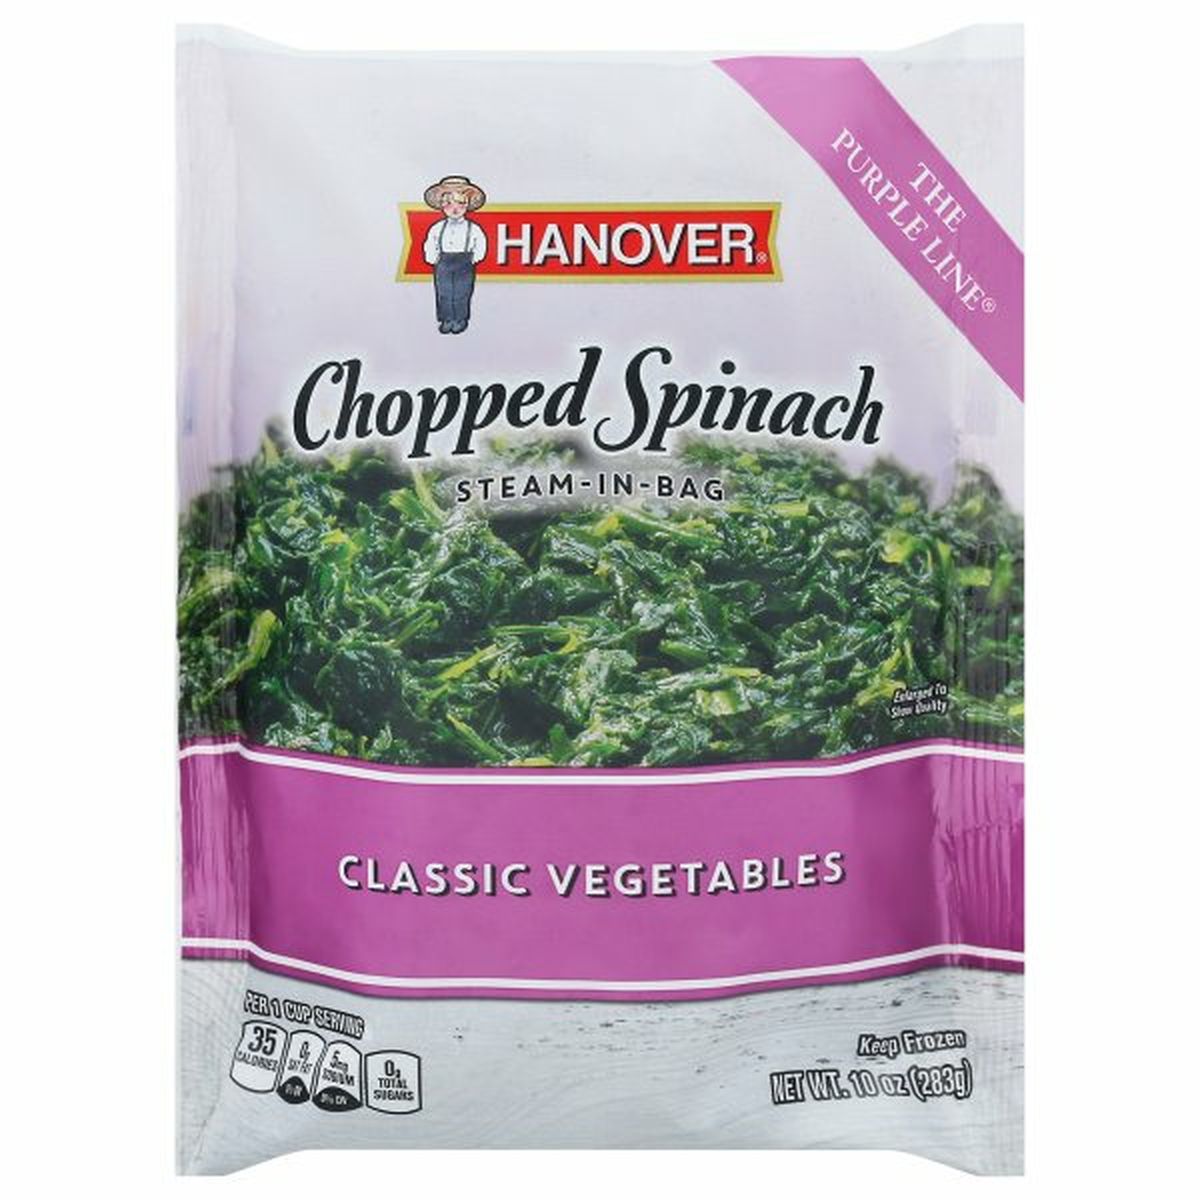 Calories in Hanover The Purple Line Chopped Spinach, Steam-in-Bag, Classic Vegetables